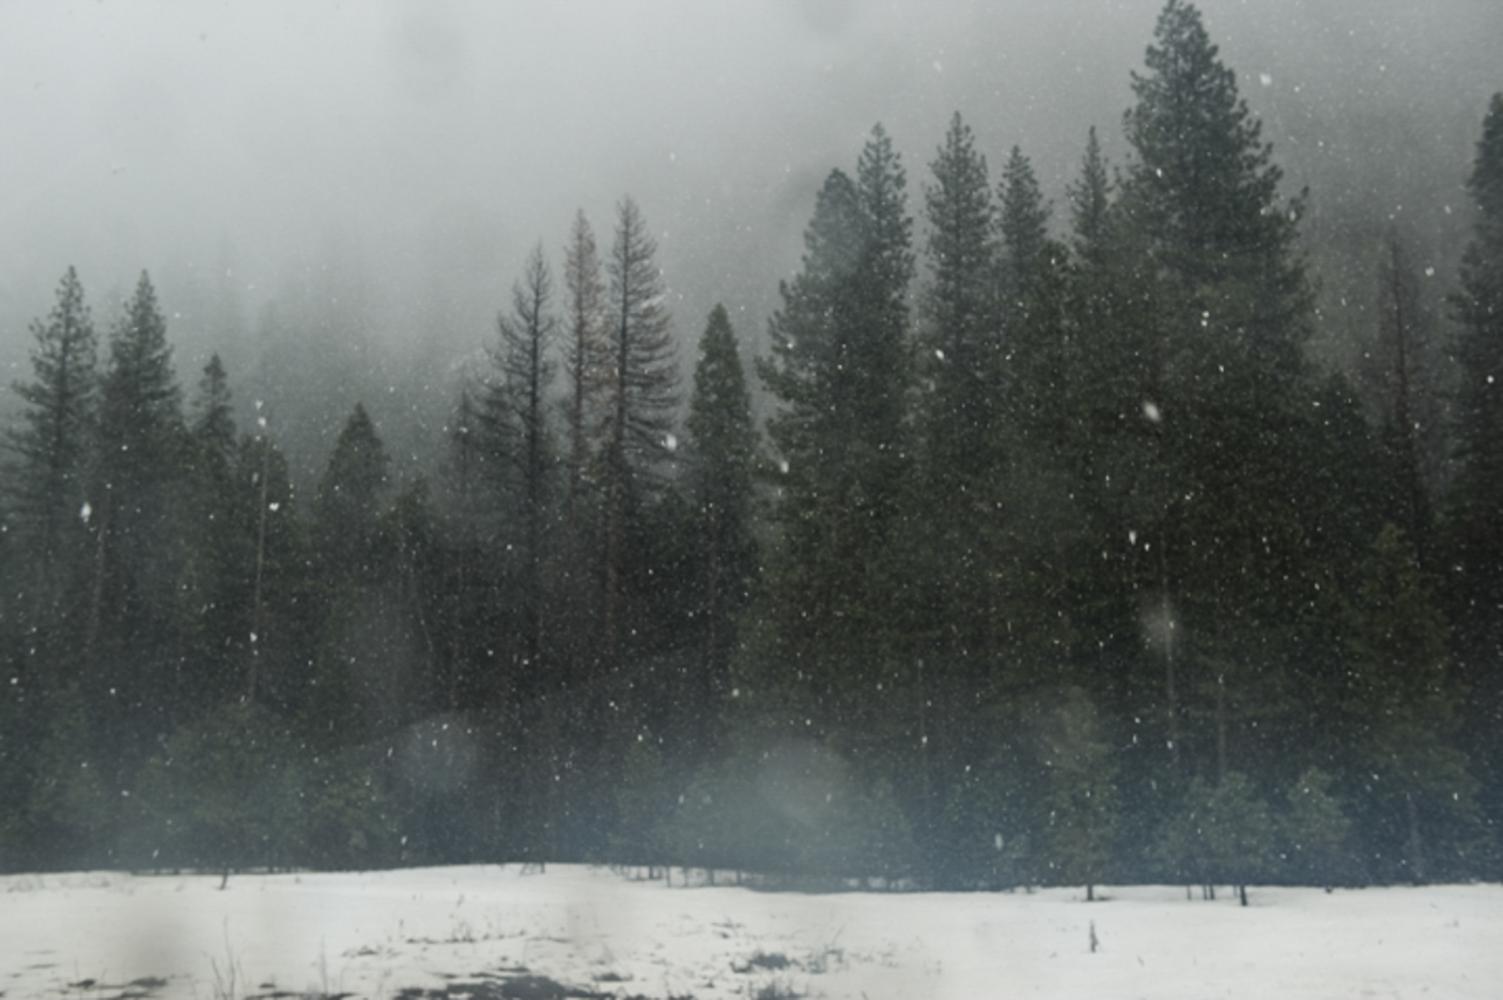 ENVIRONMENT - The first snow of winter in the valley of Yosemite...